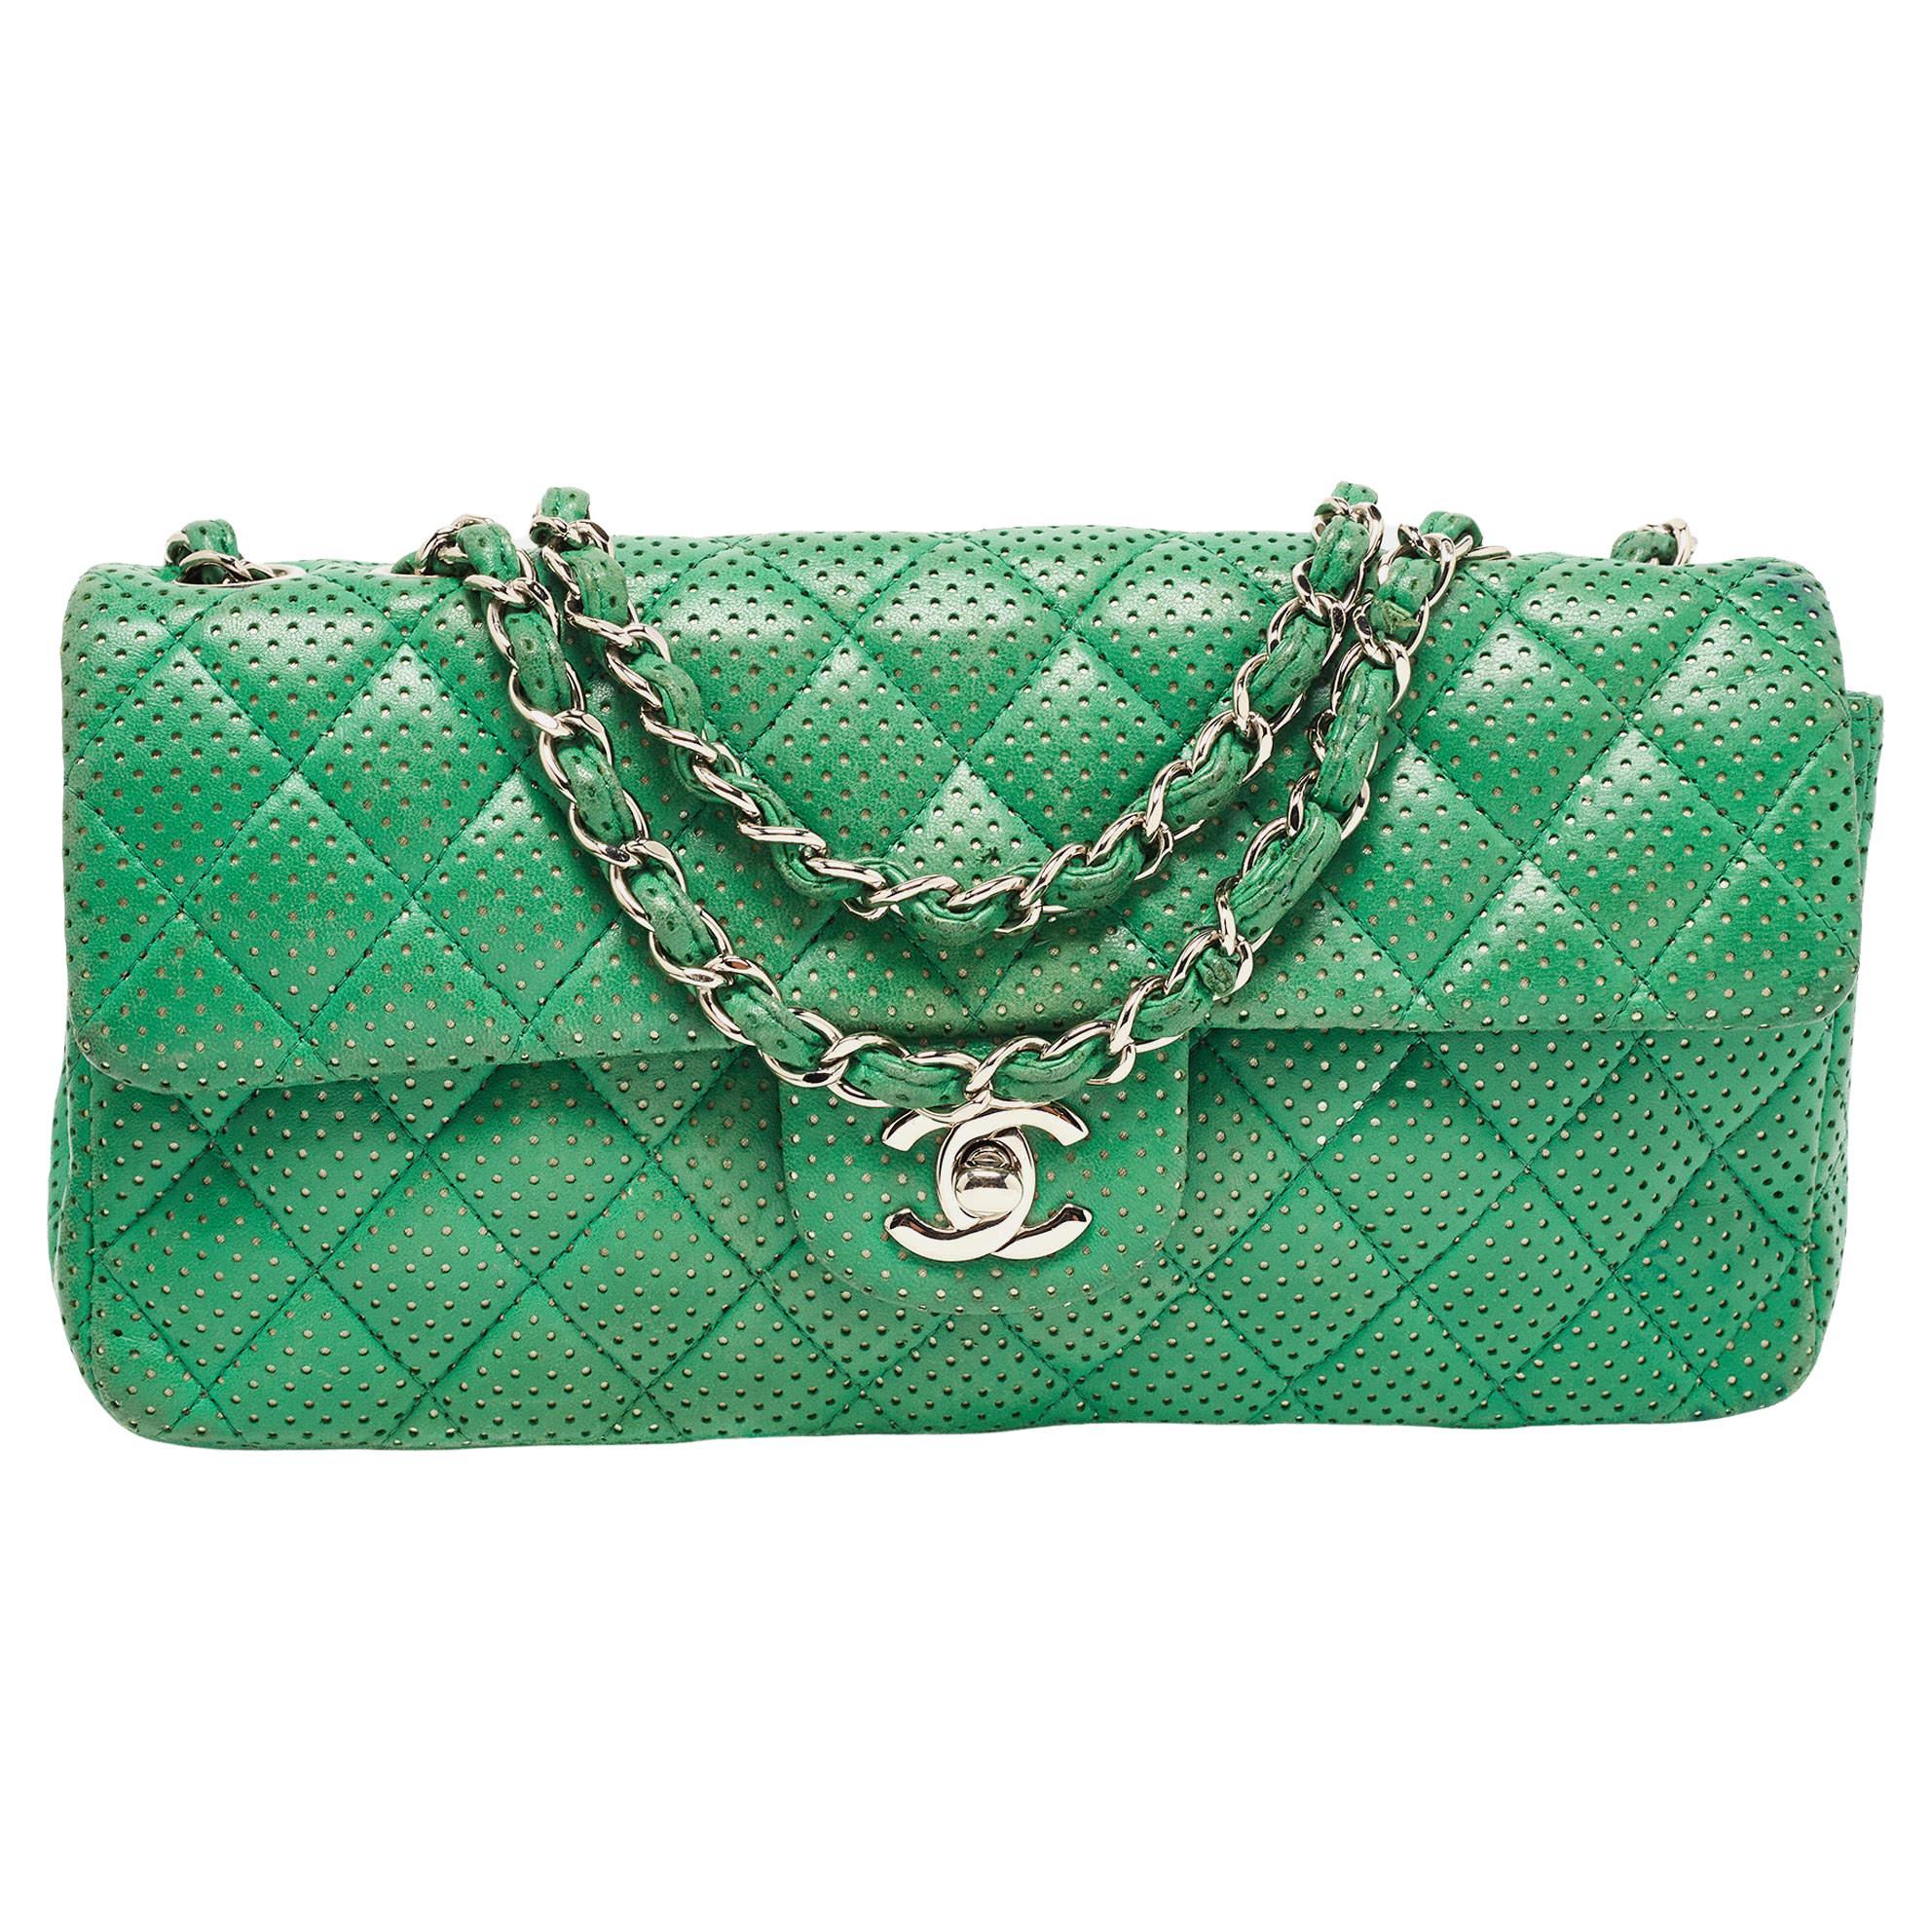 Chanel Green Perforated Lambskin Leather East West Flap Bag with